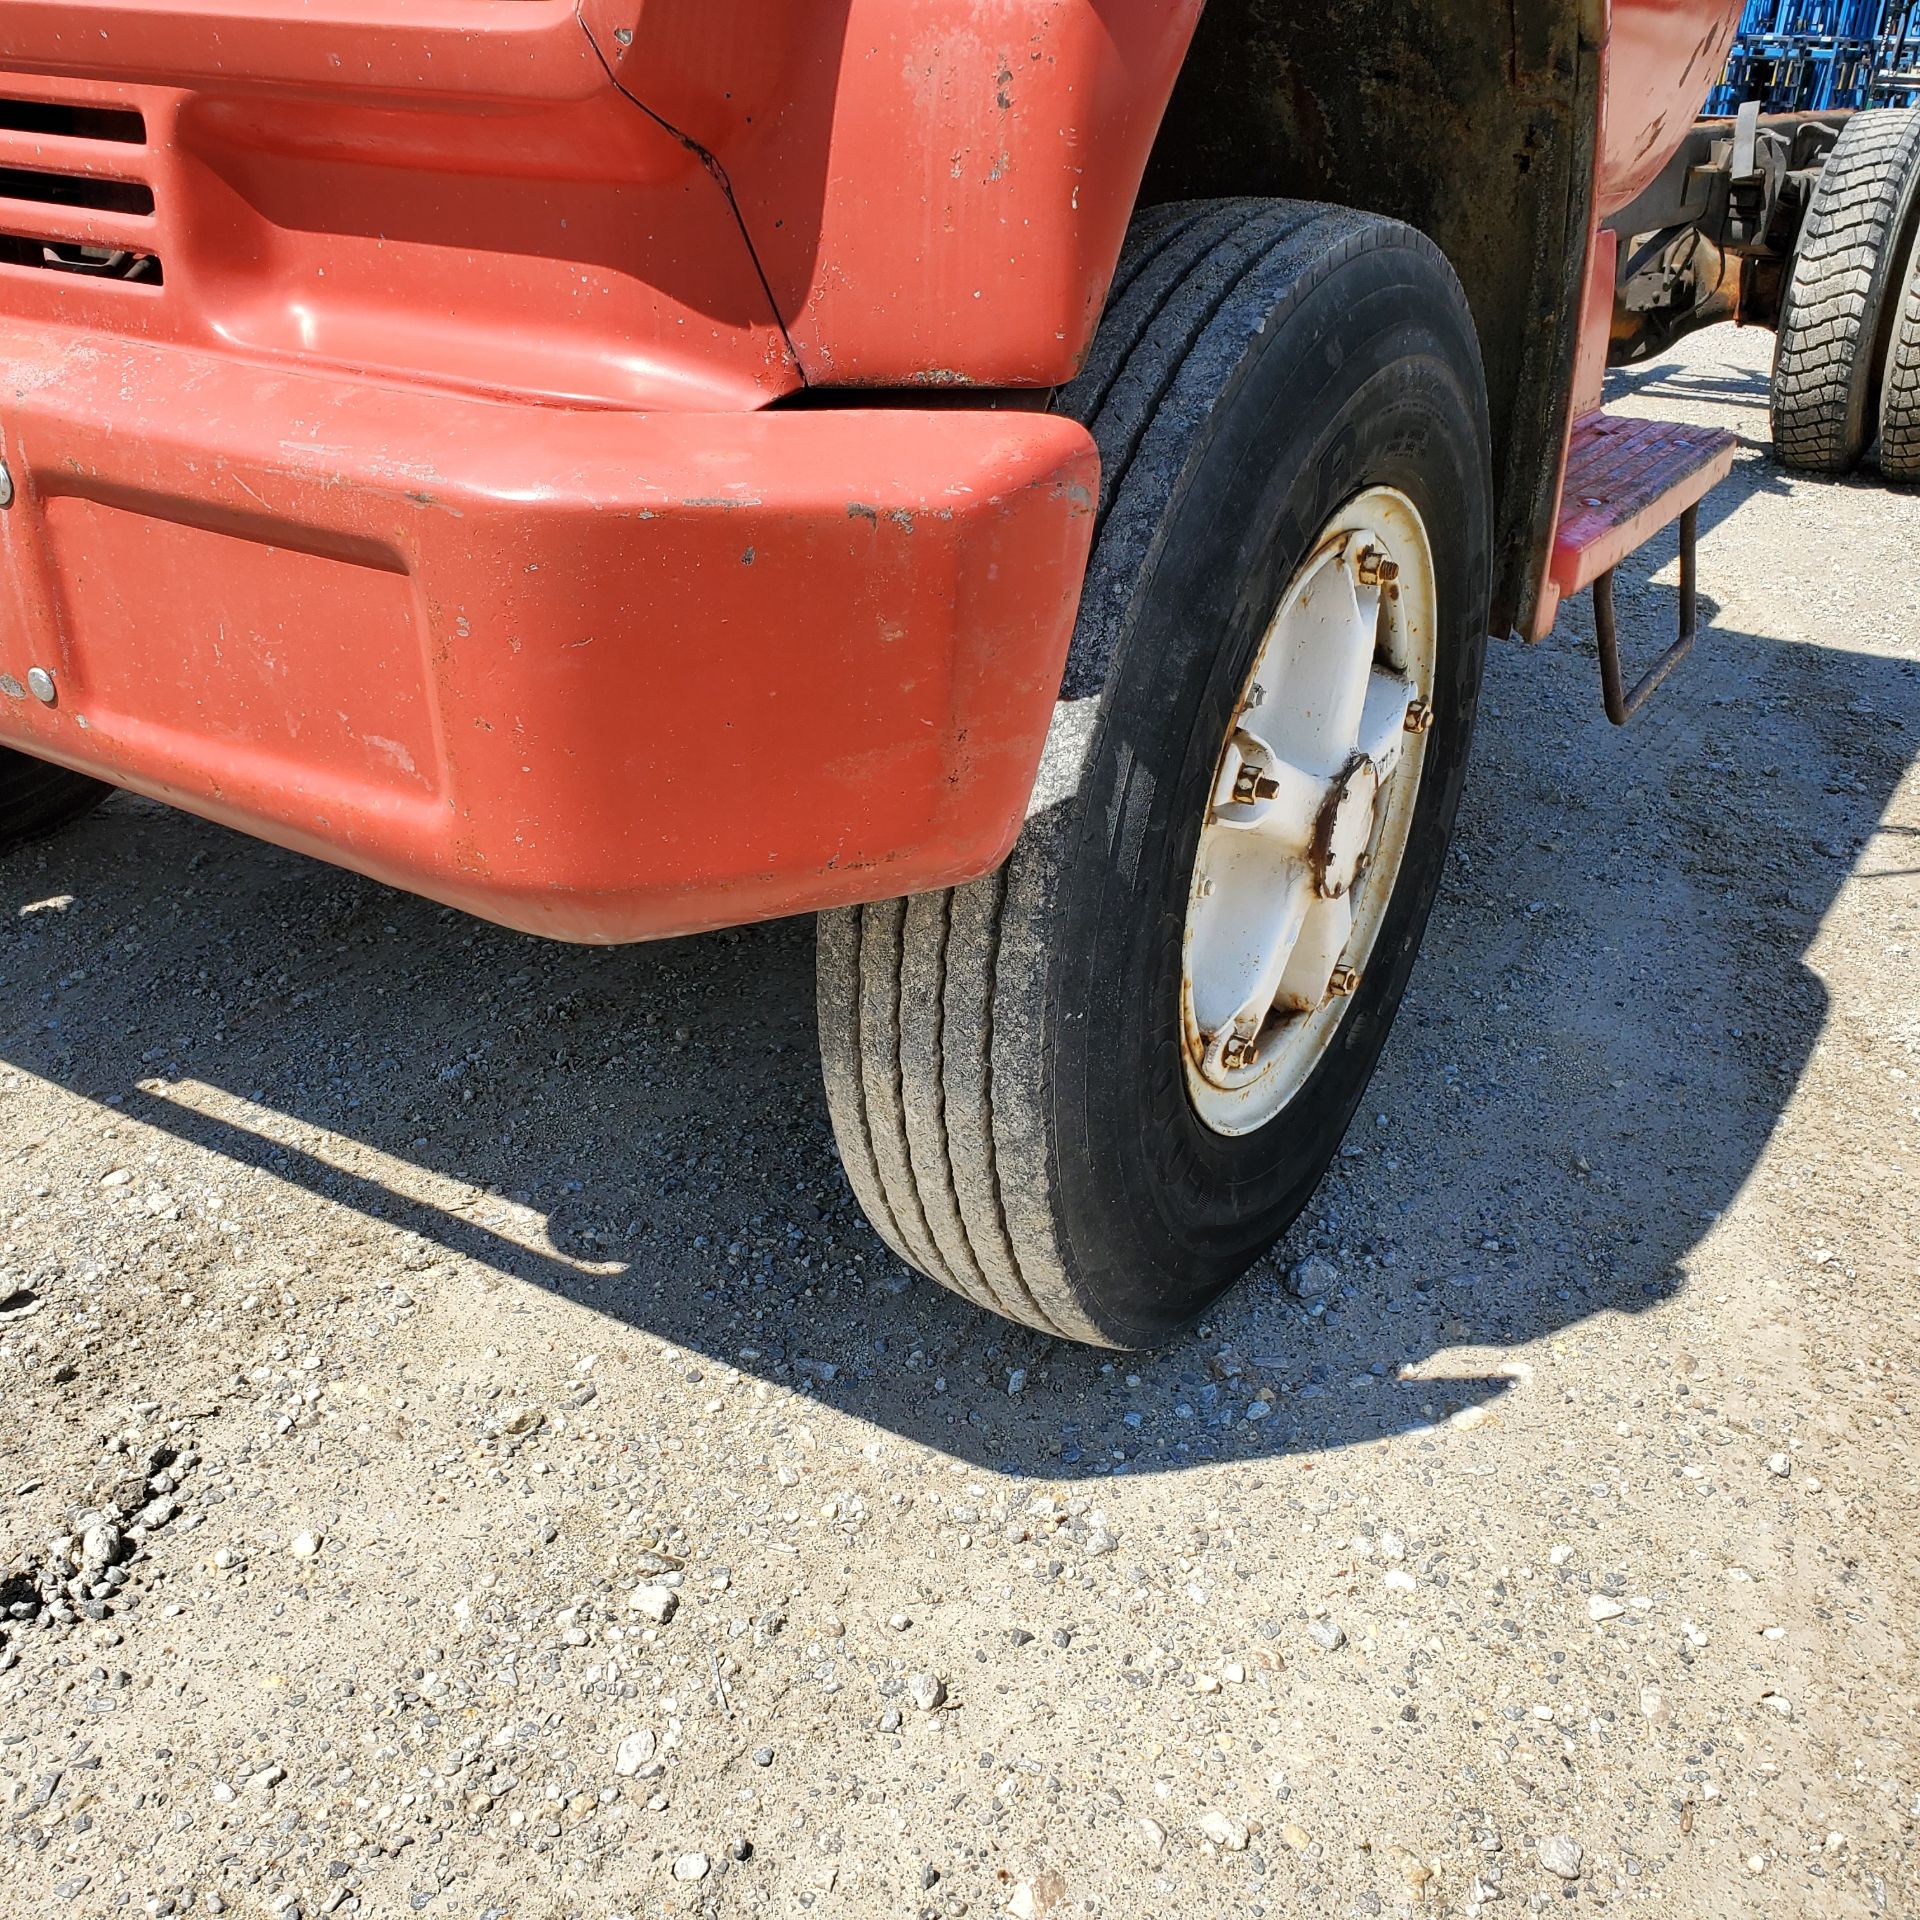 1977 Chevrolet C60 Cab and Chassis, Single Axle w/ Dual Tires and Tag Axle, 5 Speed Transmission - Image 10 of 19